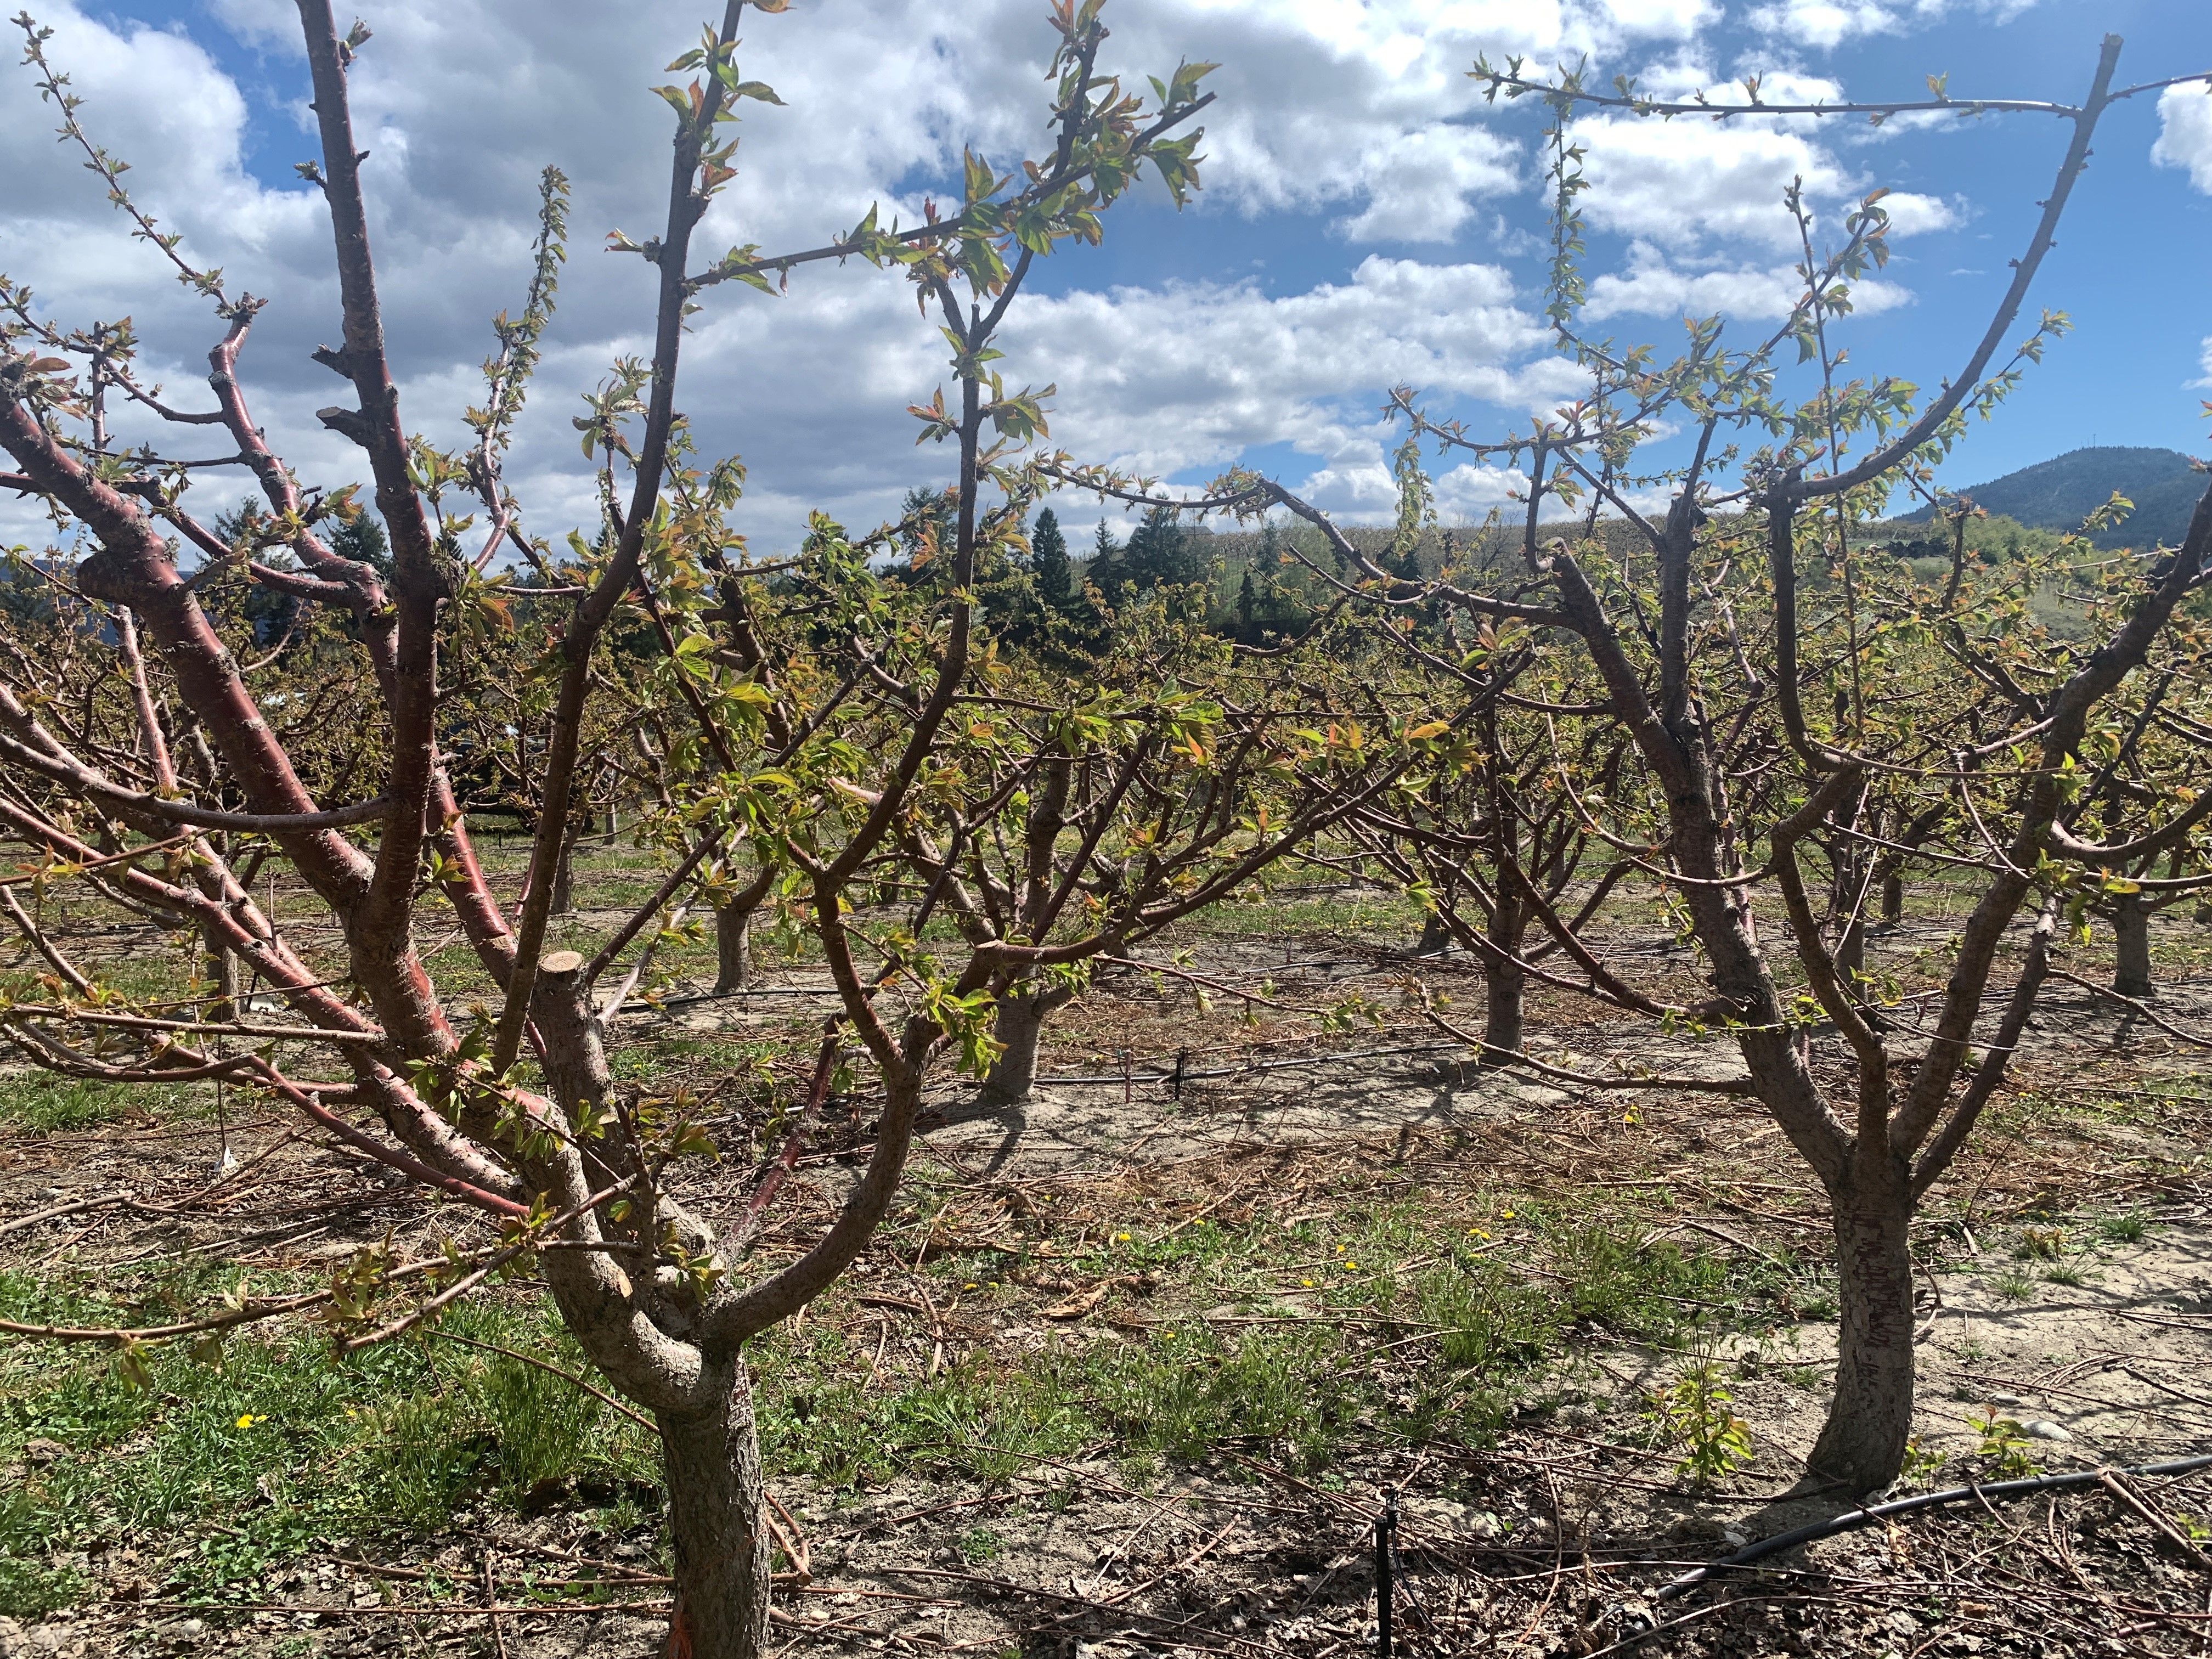 Extent of damage to Okanagan cherry buds revealed as blossom season arrives thumbnail